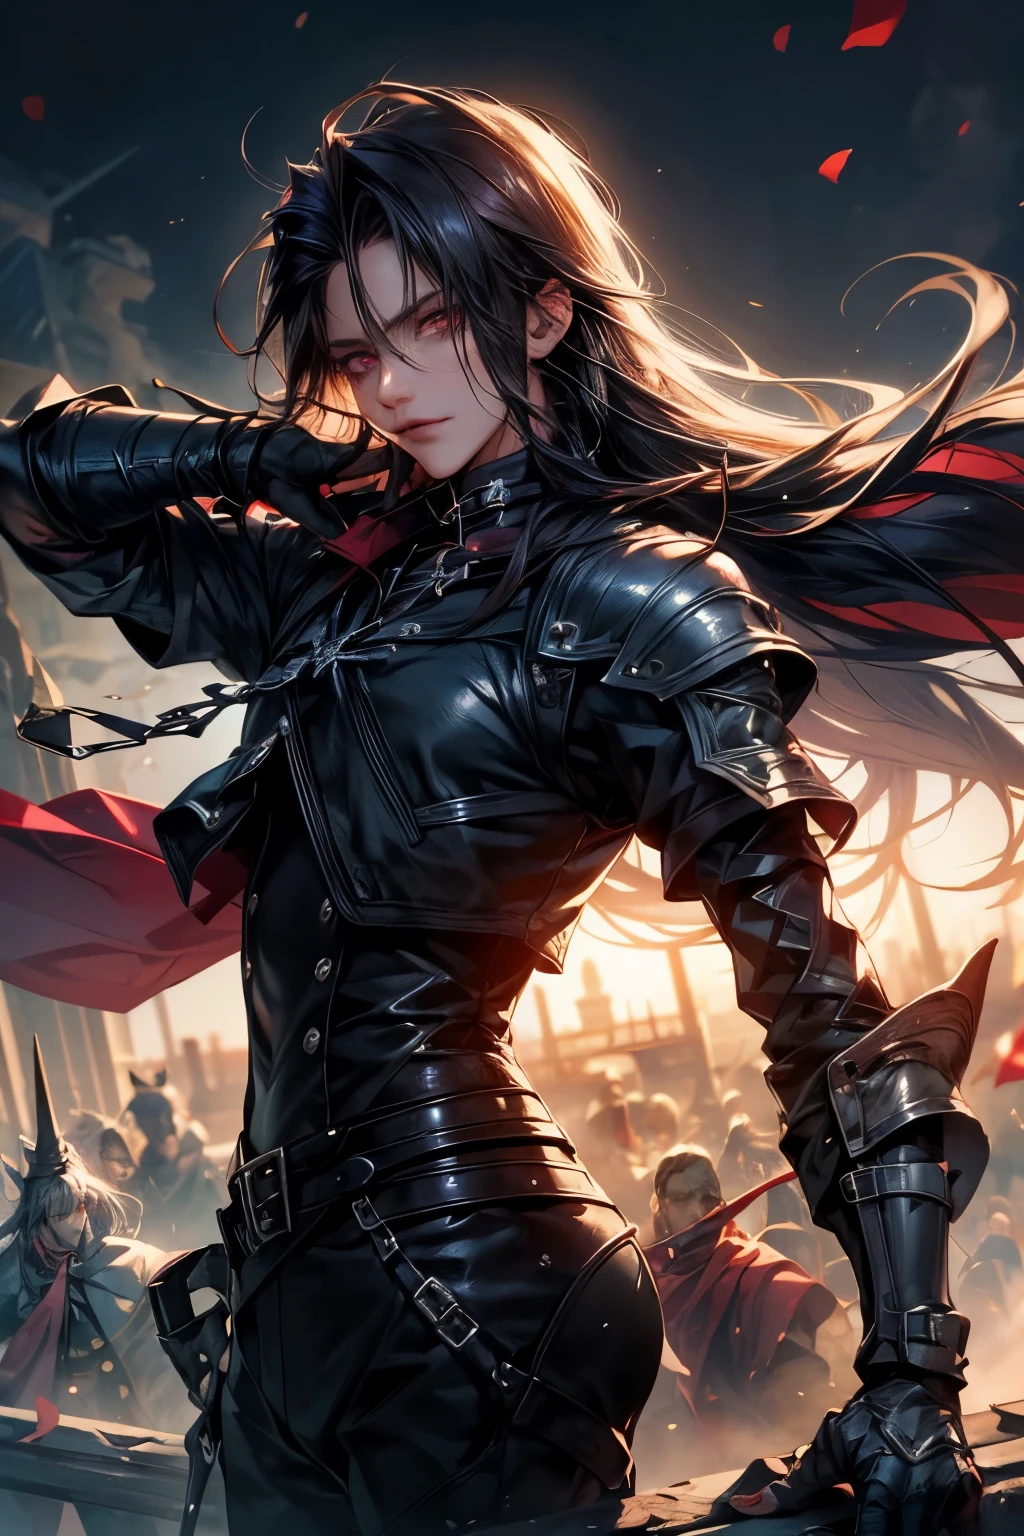 (absurdities, High Resolutions, ultra detailed, HDR), Masterpiece, (((man)))  ((masculine))) The best quality, final fantasy vii, vincent valentine, 1man only, handsome, wide, black hair, vibrant red eyes, fine eyes and detailed face, armor, ((Intricate weapon)), Sitting on the throne, legs open, affected smile, annoying. Final Fantasy, abs, badass pose, Anime boy on a bed with his hands on his head, Beautiful anime pose, Anime hombre handsome, anime male character, Badass Anime 8K, Detailed anime character art, HDR Anime MacManus Anime Concept, anime boy, Ikuto Yamashita, CG anime soft art, manga wallpaper 4k, inspired by Yamagata Hiro, anime wallaper